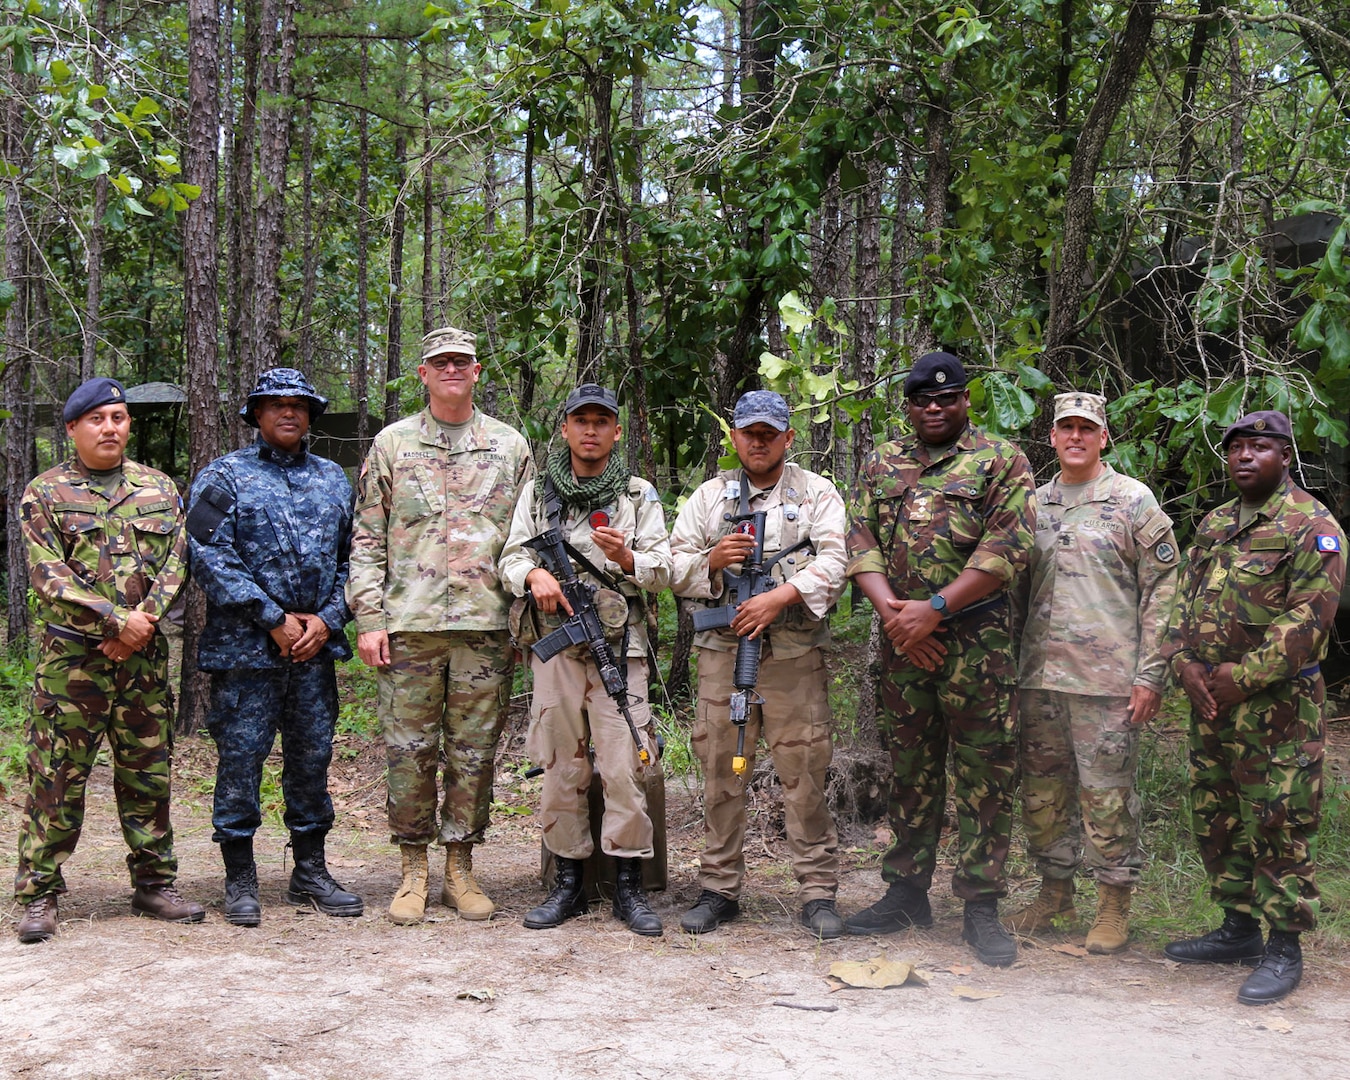 Maj. Gen. Keith Waddell, Louisiana National Guard adjutant general, and Command Sgt. Maj. Clifford J. Ockman Jr., Louisiana National Guard senior enlisted advisor, with service members from Belize during a visit to the Joint Readiness Training Center at Fort Johnson in Leesville, La., June 6, 2023.  Louisiana and Belize have been partnered together as part of the State Partnership Program since 1996.